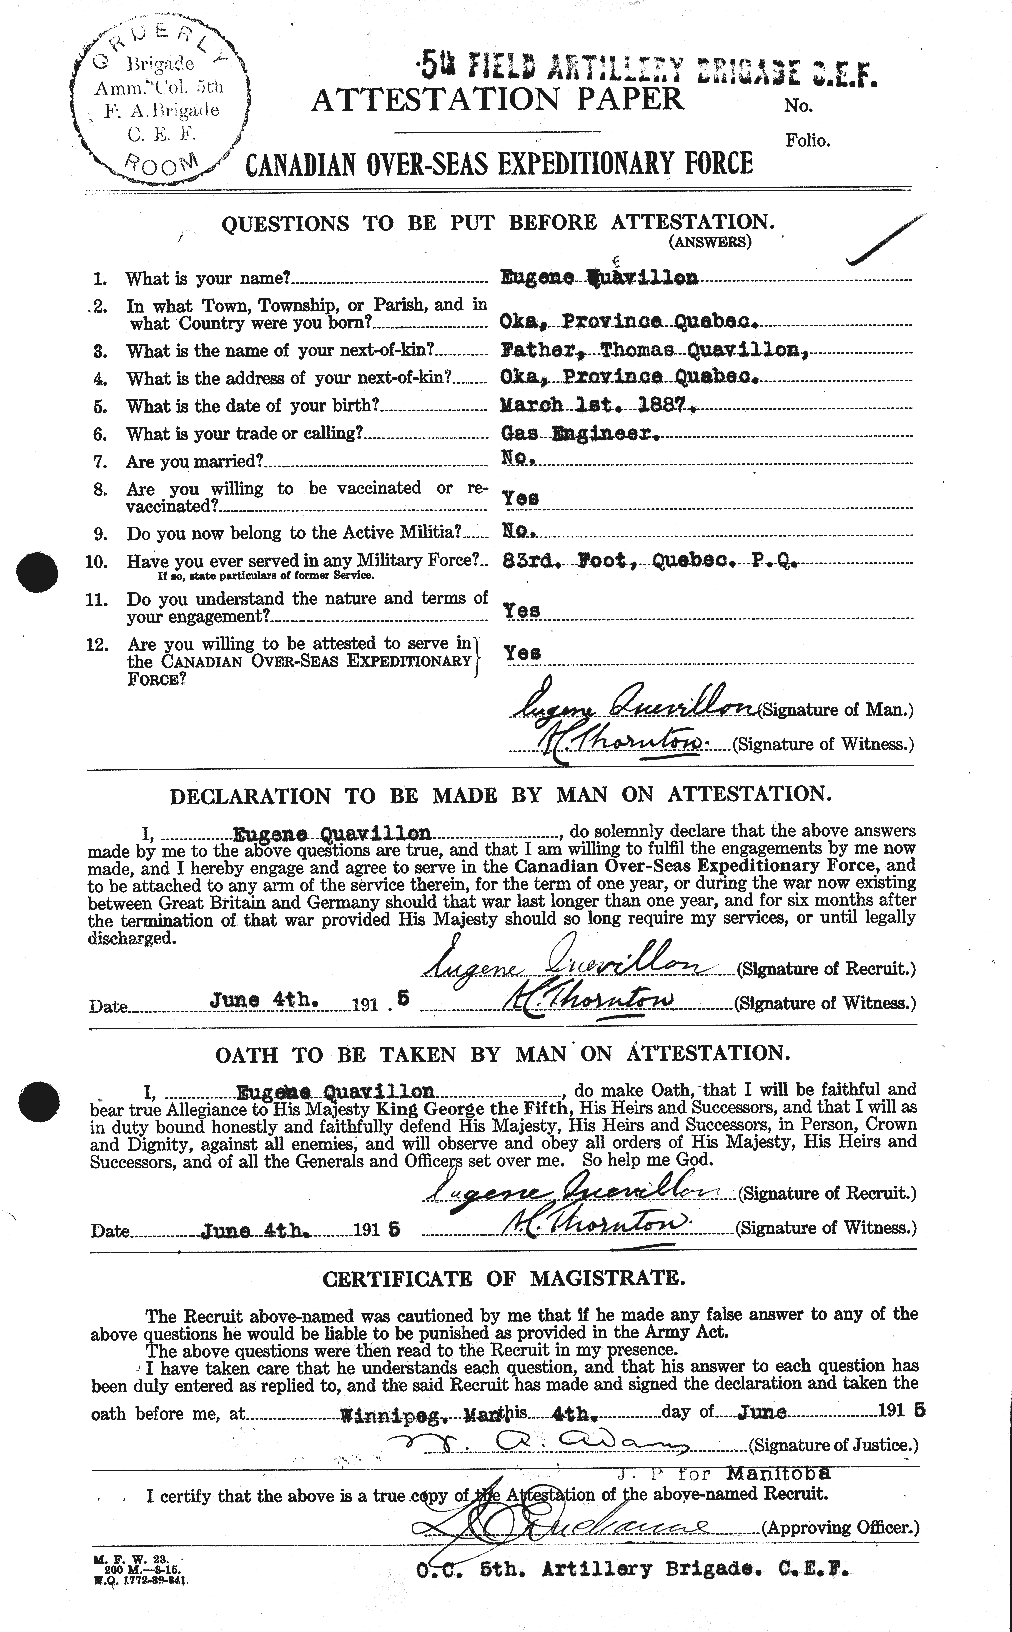 Personnel Records of the First World War - CEF 592943a